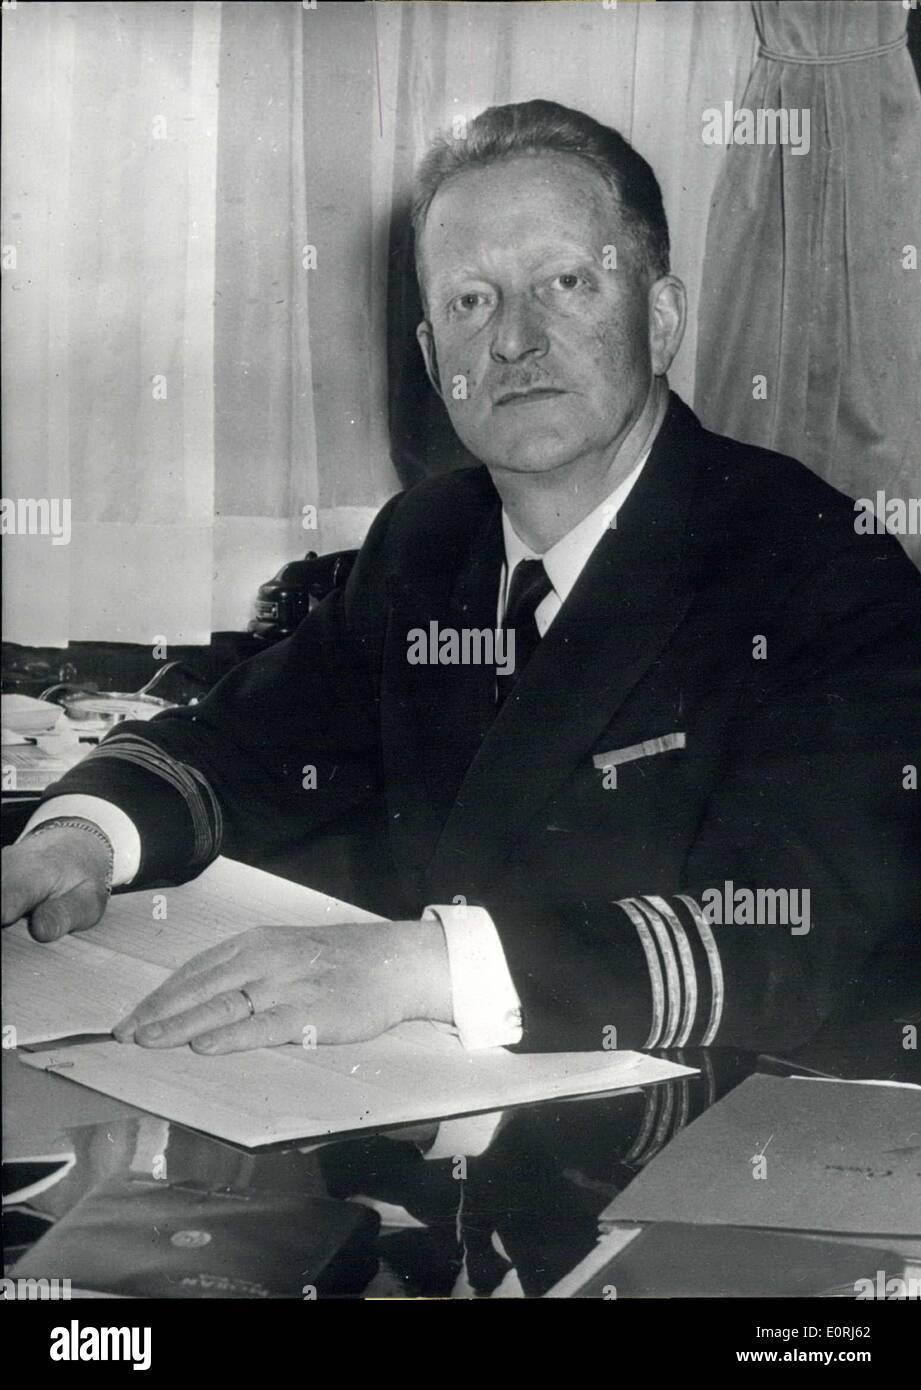 Oct. 04, 1959 - He Will Be In Command Of ''France''; Photo Shows A recent portrait of Captain Croisile of the French Line, the Present commander of the ''Liberte'' who has been appointed commander of the ''France'', The new liner which is being completed at Saint-Nazaire Shipyards. Stock Photo